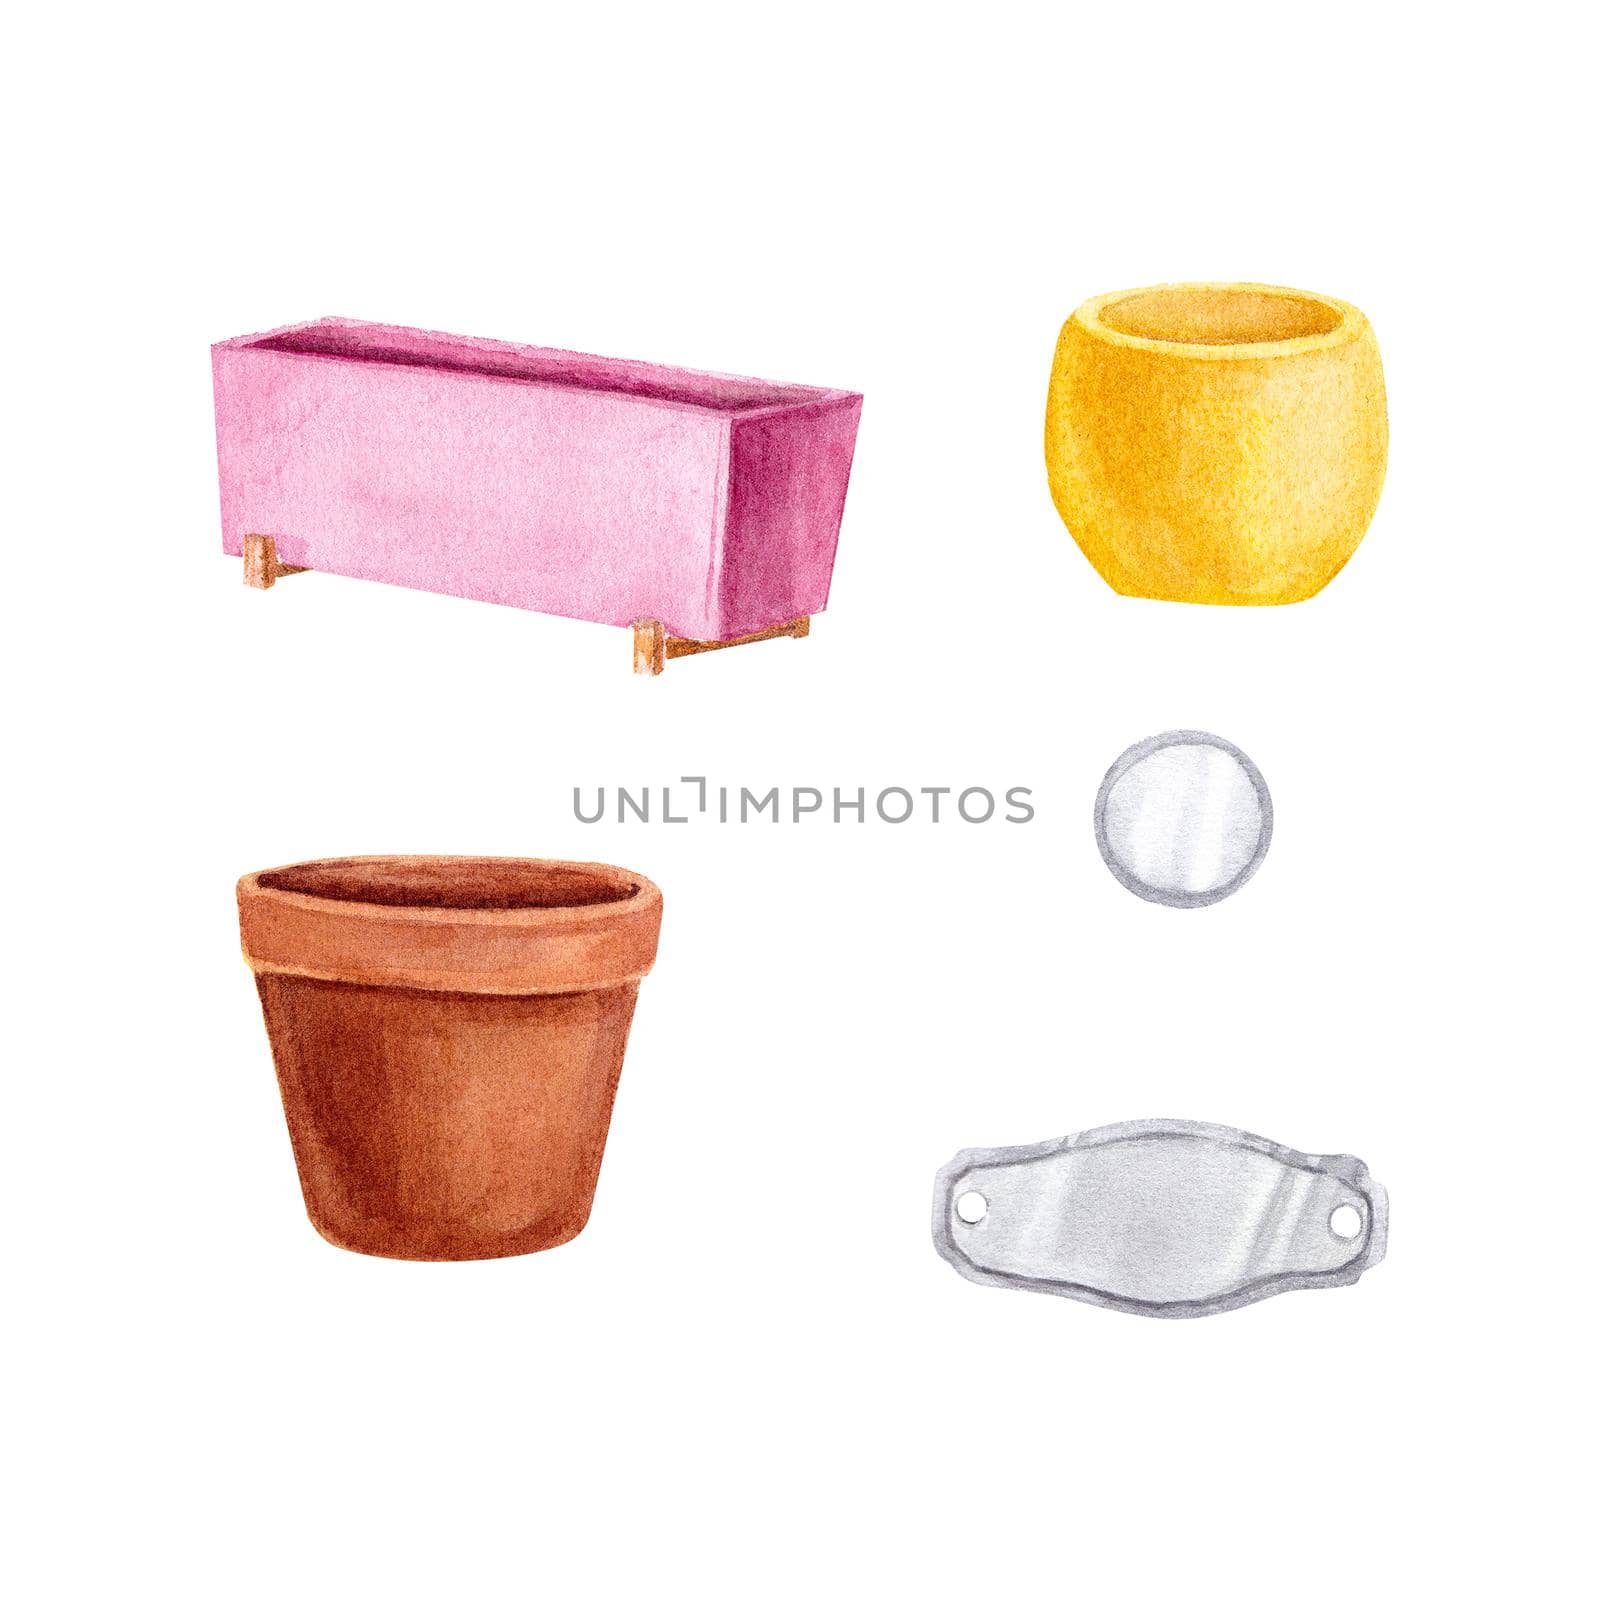 Flower pot on a white background. Watercolor illustration. Pink rectangular pot on a wooden stand. A garden item. The decorative pot is ideal for printing, posters, postcard and scrapbooking design